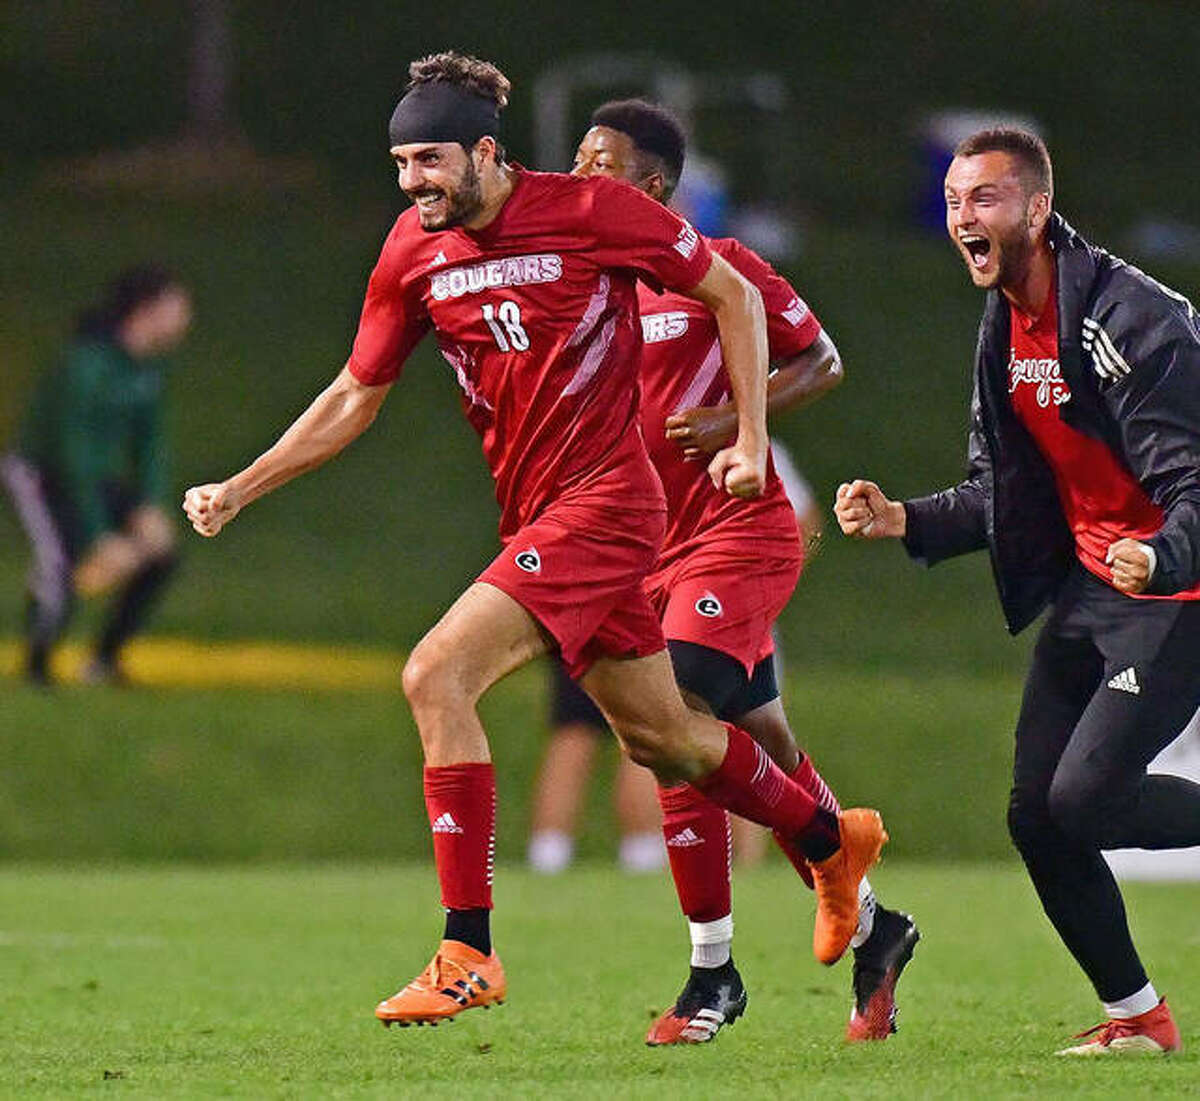 Pau Palacin of SIUE and teammates celebrate his second-half goal that pulled the cougars into a 1-1 tie with Saint Louis University in the 30th Bronze Boot soccer game Tuesday night at Hermann Stadium